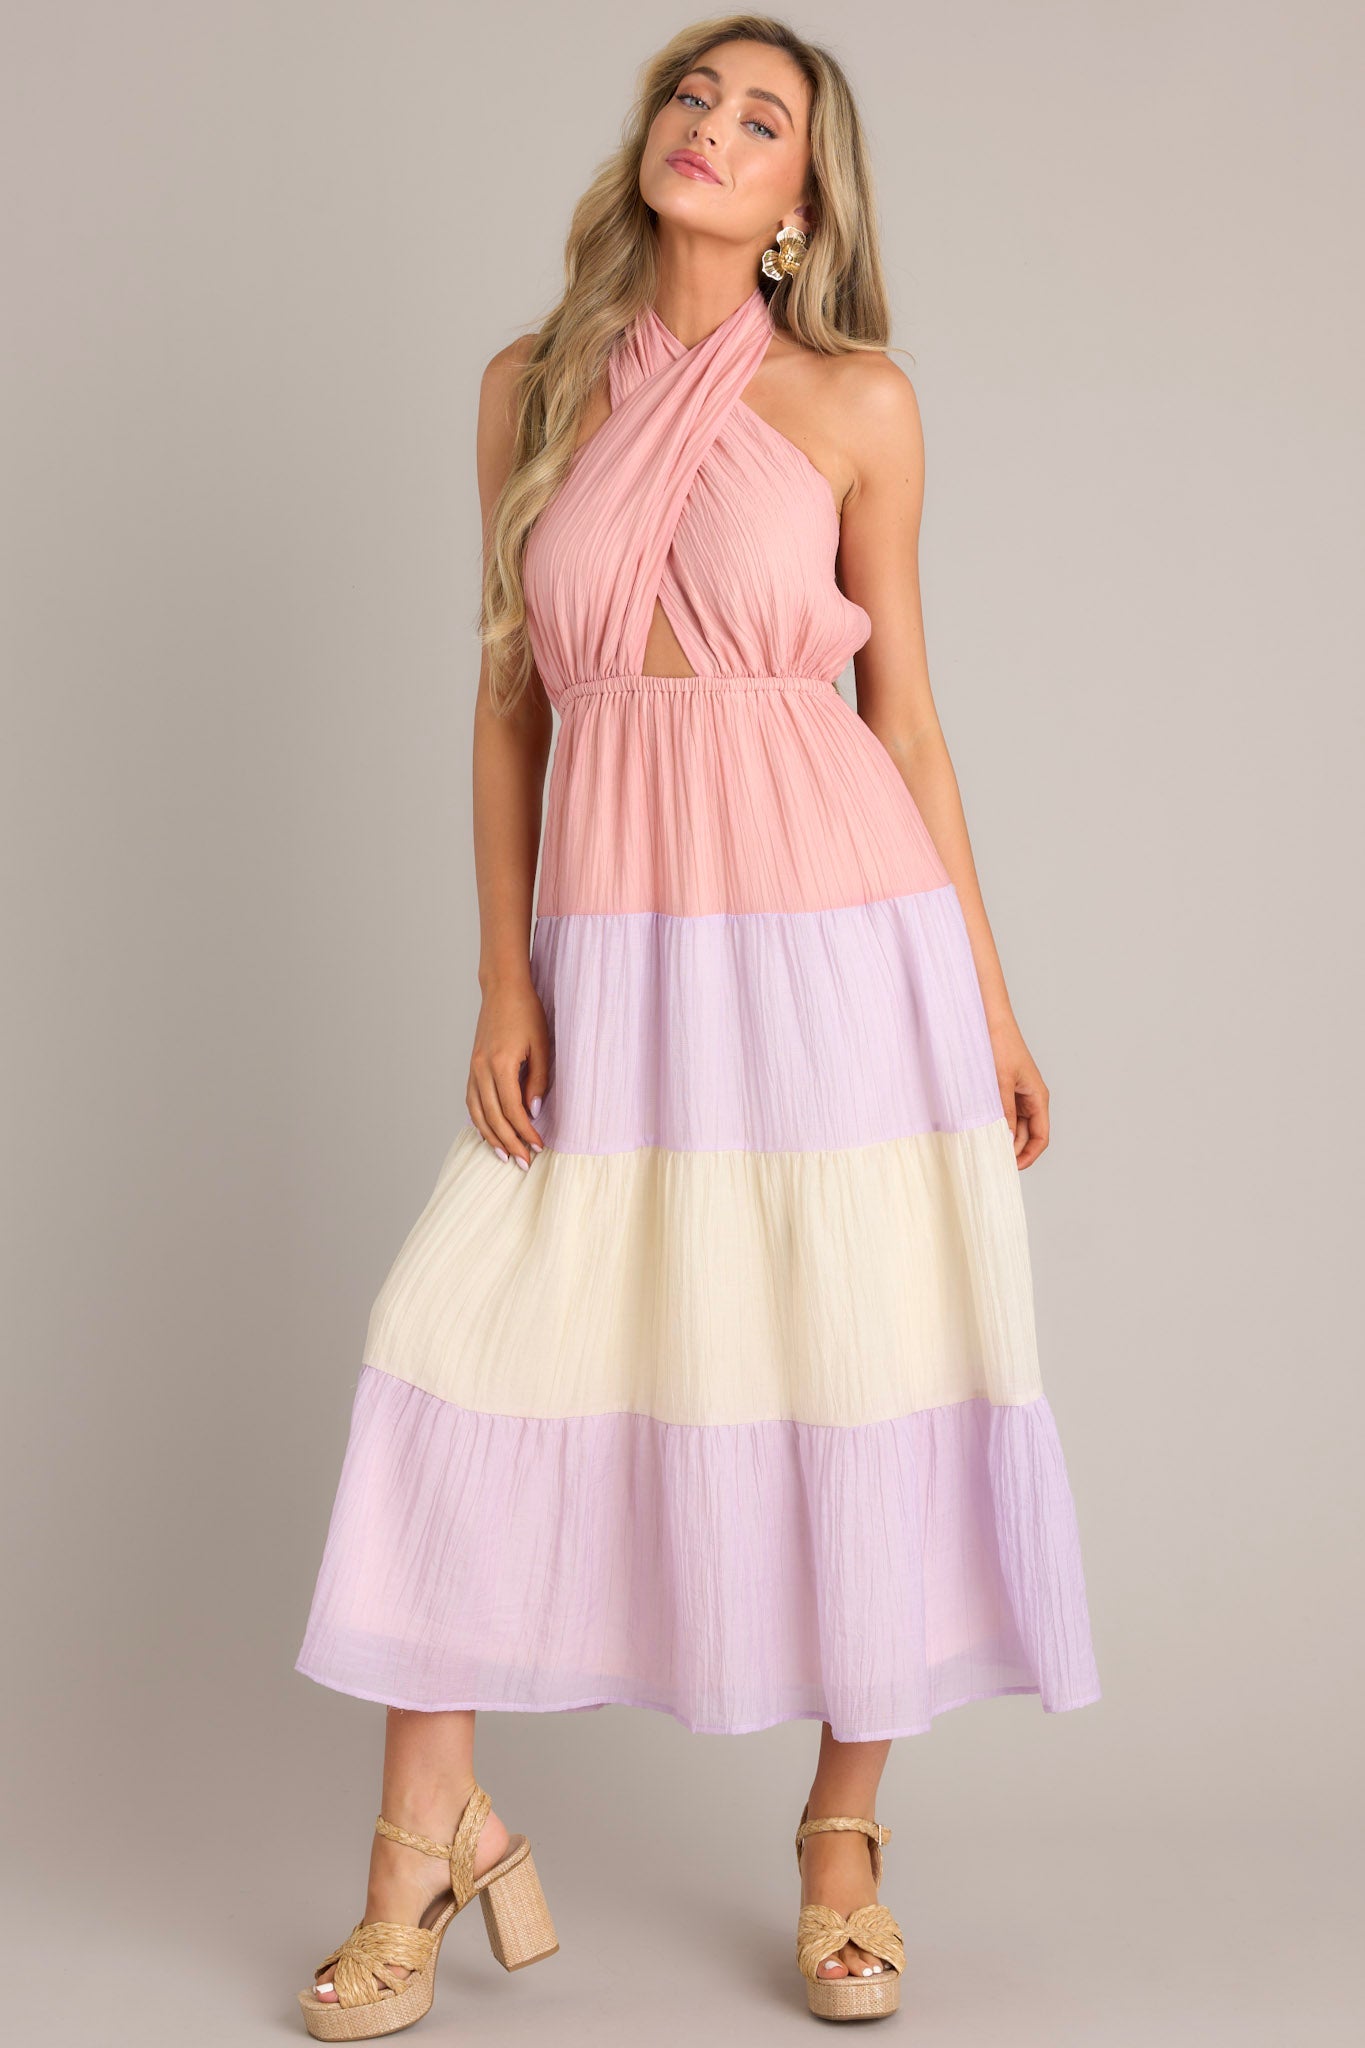 Effortlessly chic dress featuring a self-tie halter neckline with a back tie closure, an alluring open back, and an elastic band at the back of the bust for a comfortable fit. Complete with an elastic waistband and a flowing skirt for a flattering silhouette.